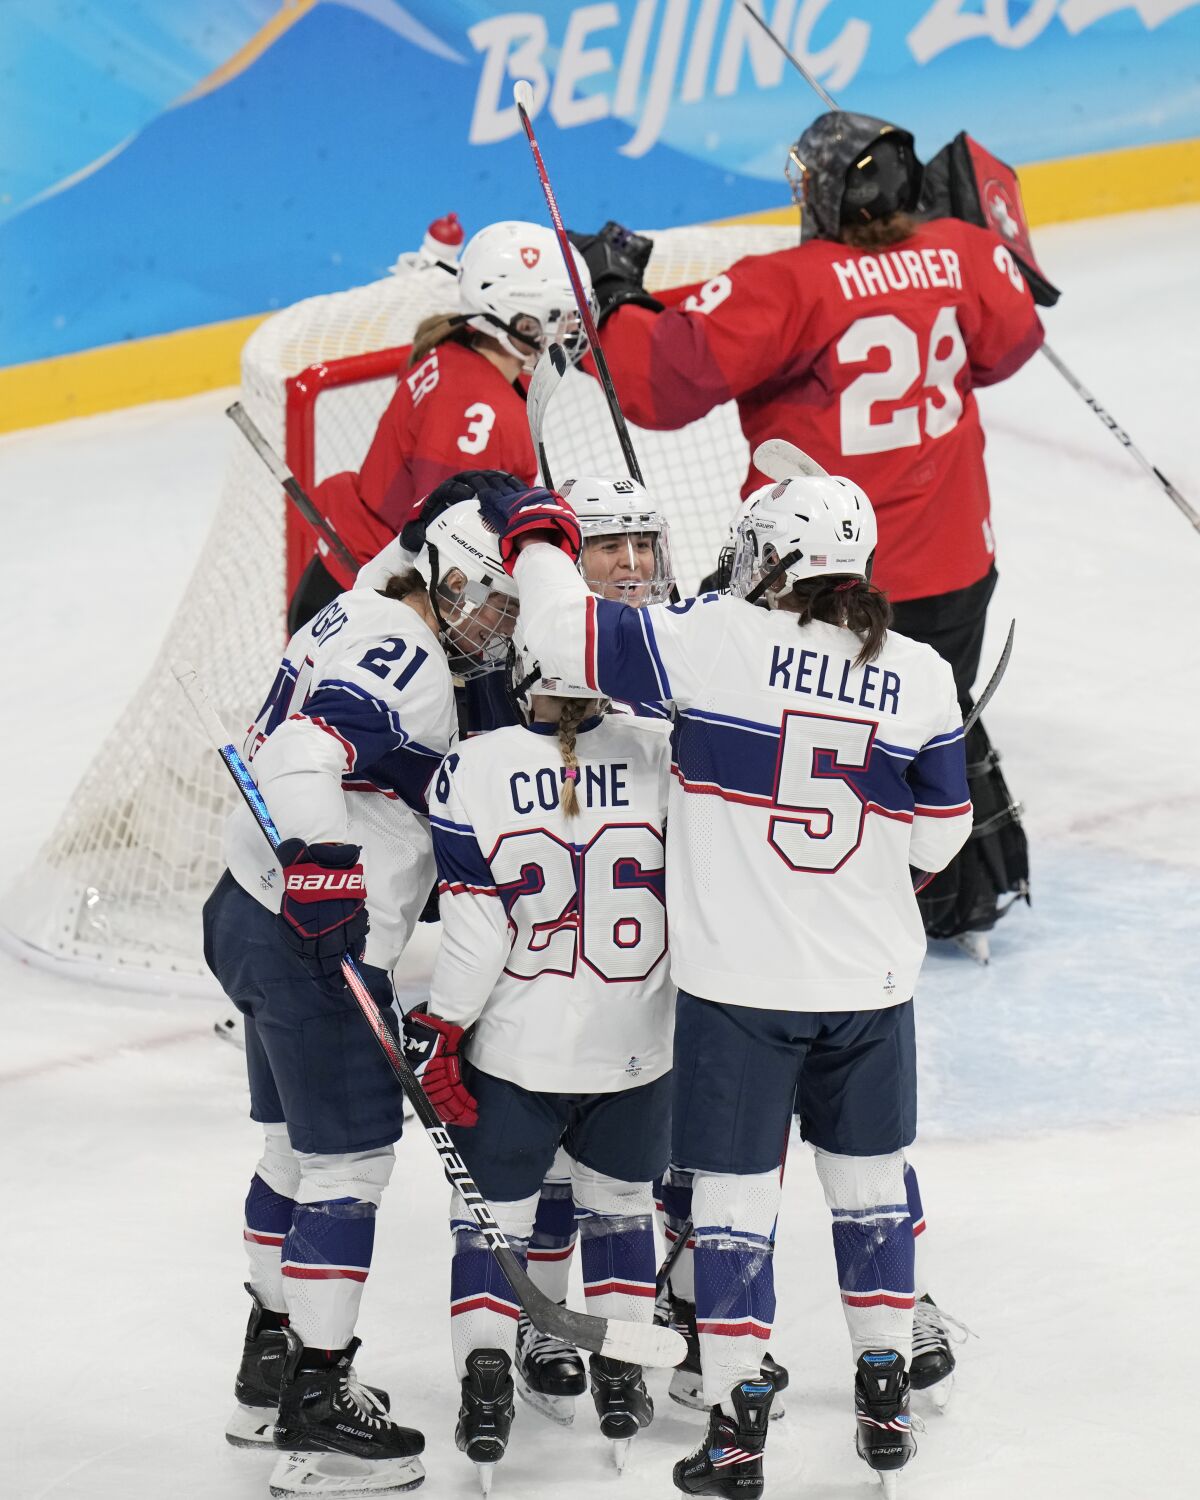 United States' Hilary Knight (21) is congratulated after scoring a goal against Switzerland goalkeeper Saskia Maurer (29) during a preliminary round women's hockey game at the 2022 Winter Olympics, Sunday, Feb. 6, 2022, in Beijing. (AP Photo/Petr David Josek)